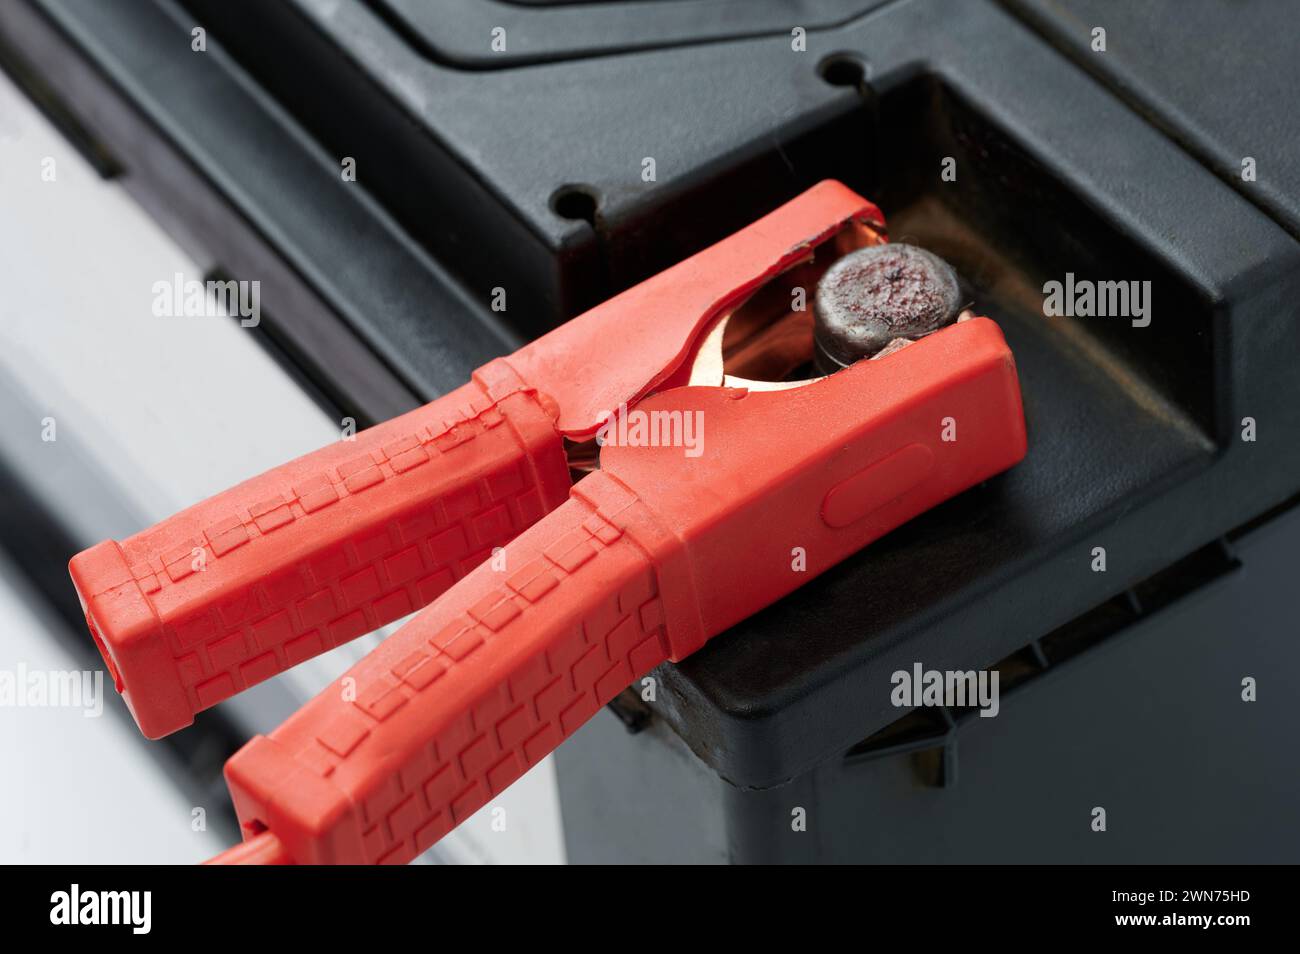 Repair used car battery theme. Red jumper on battery connector close up view Stock Photo